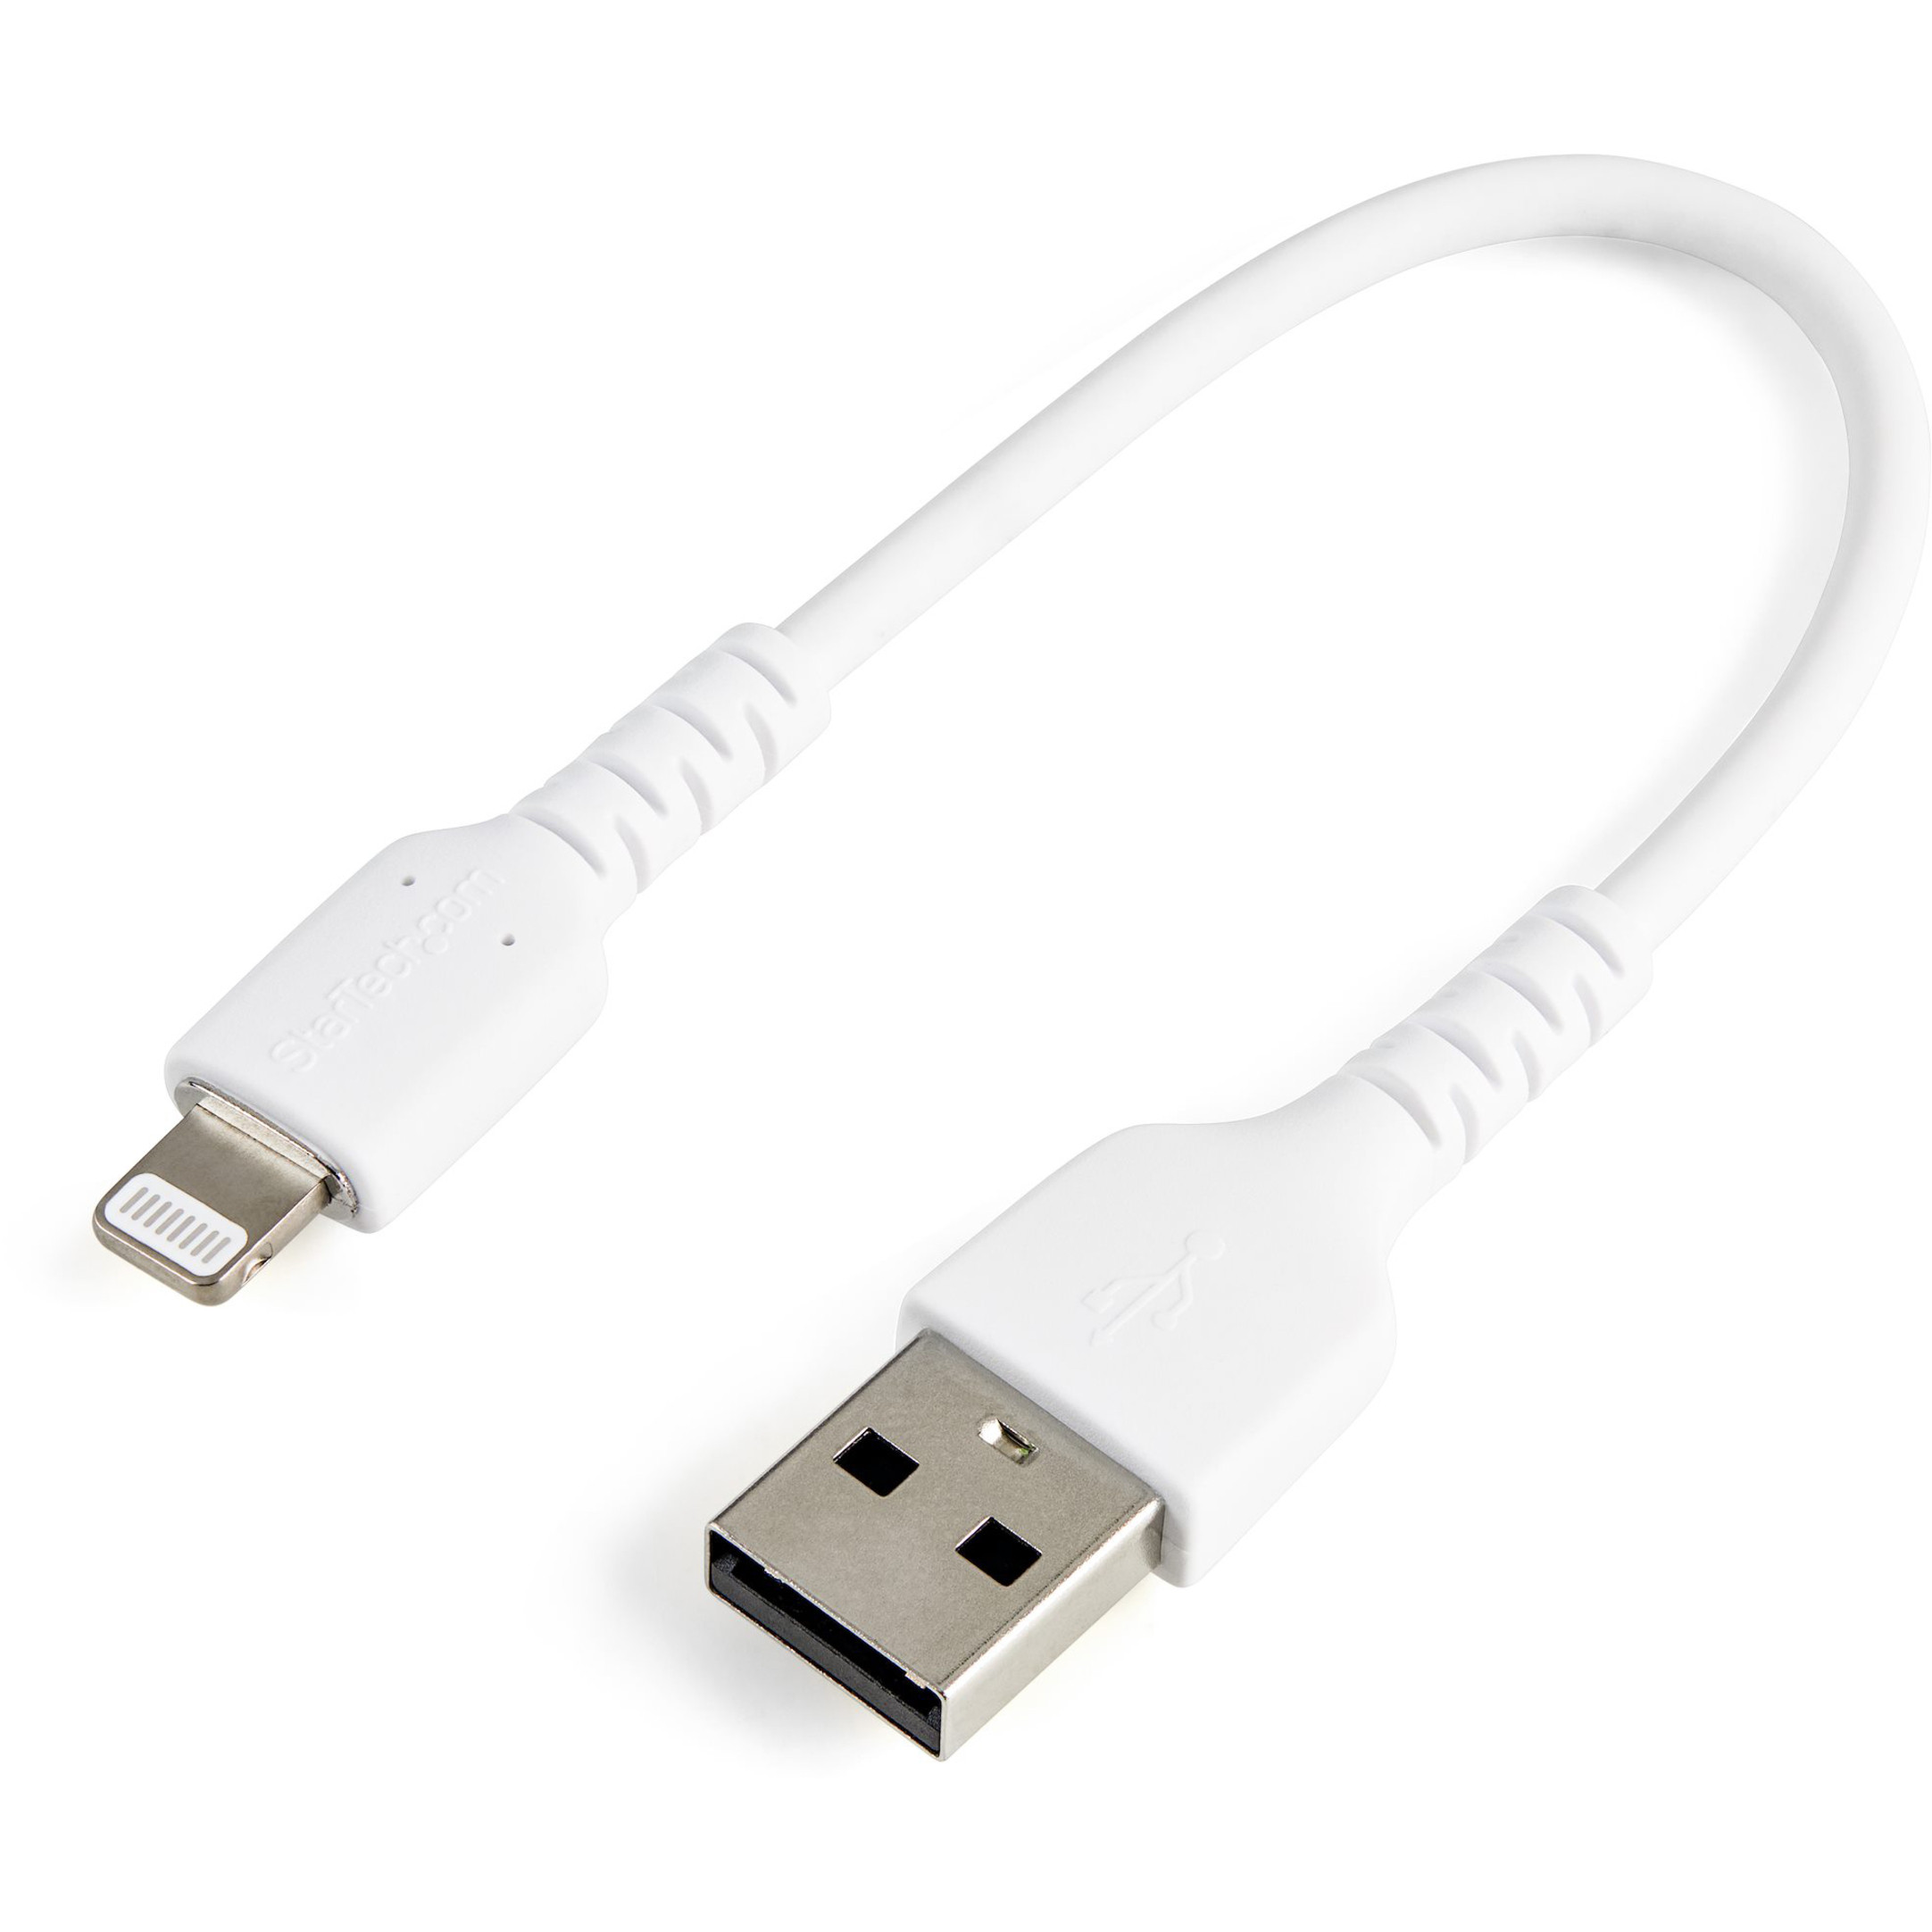 USB-A to Lightning Cable - MFi Certified - 10 Inches